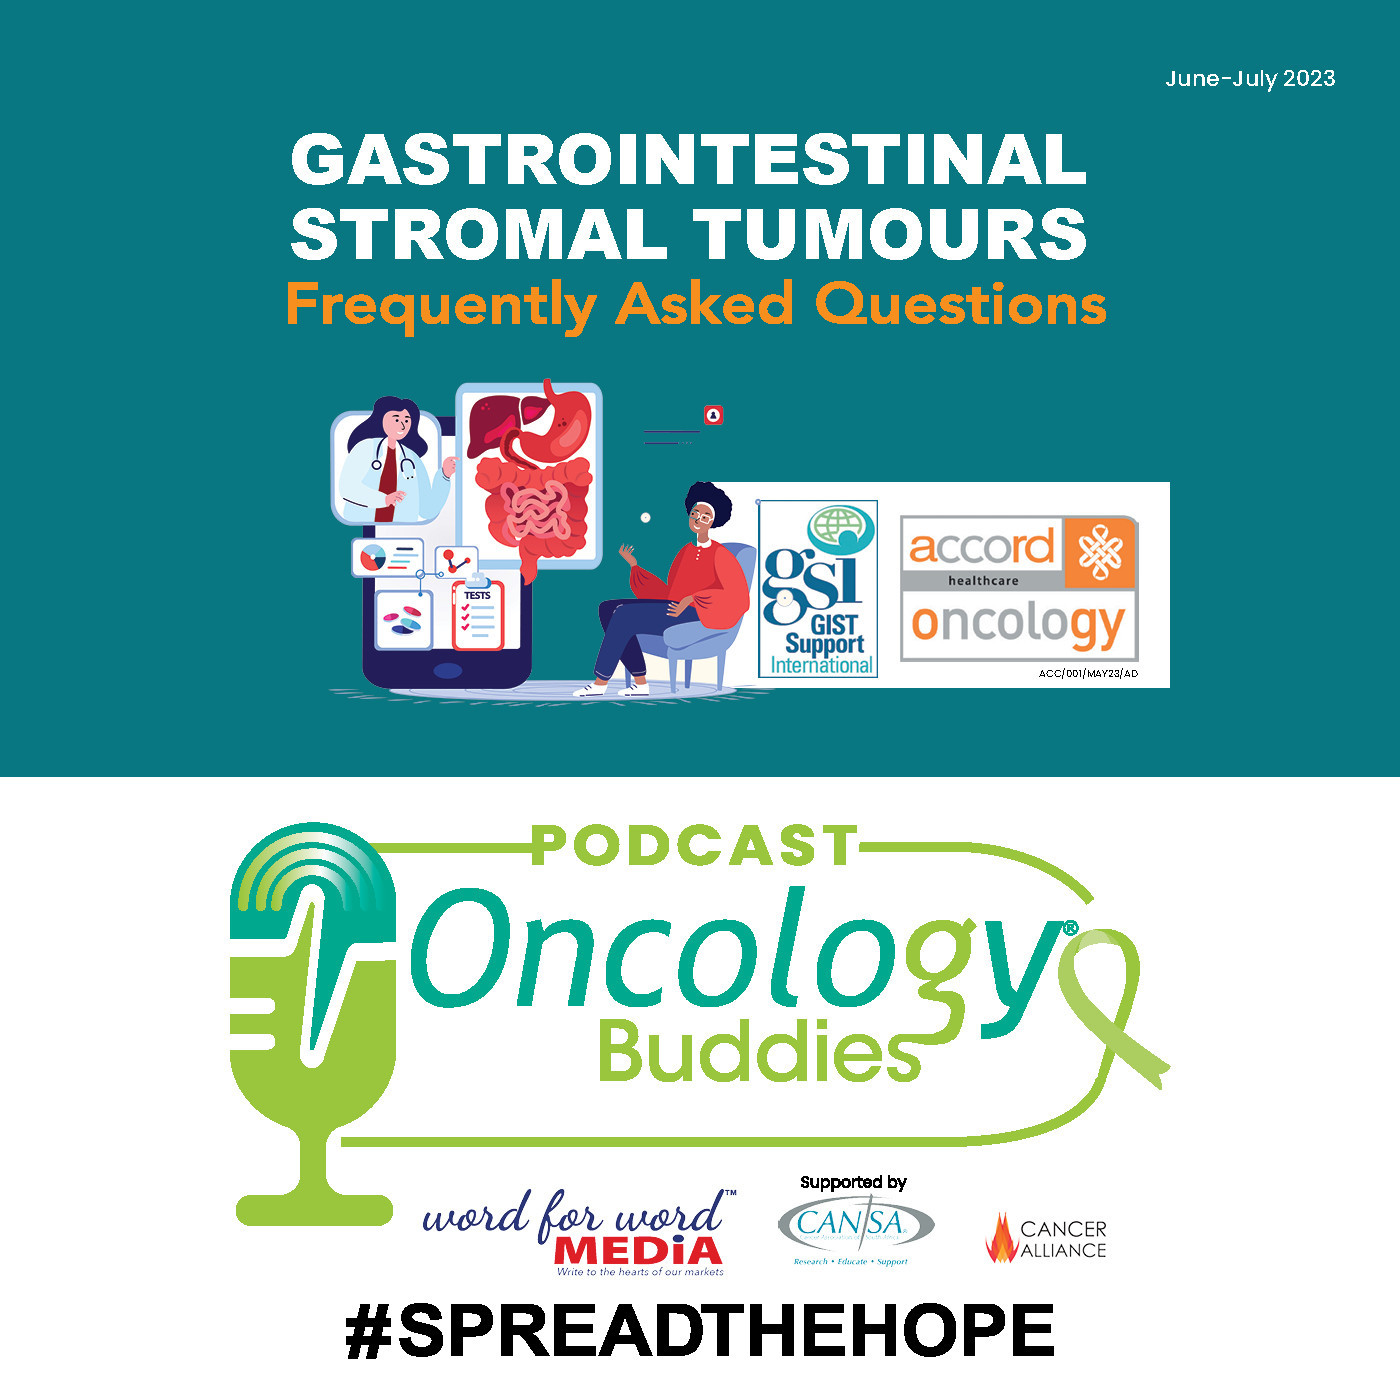 Gastrointestinal stromal tumours - frequently asked questions